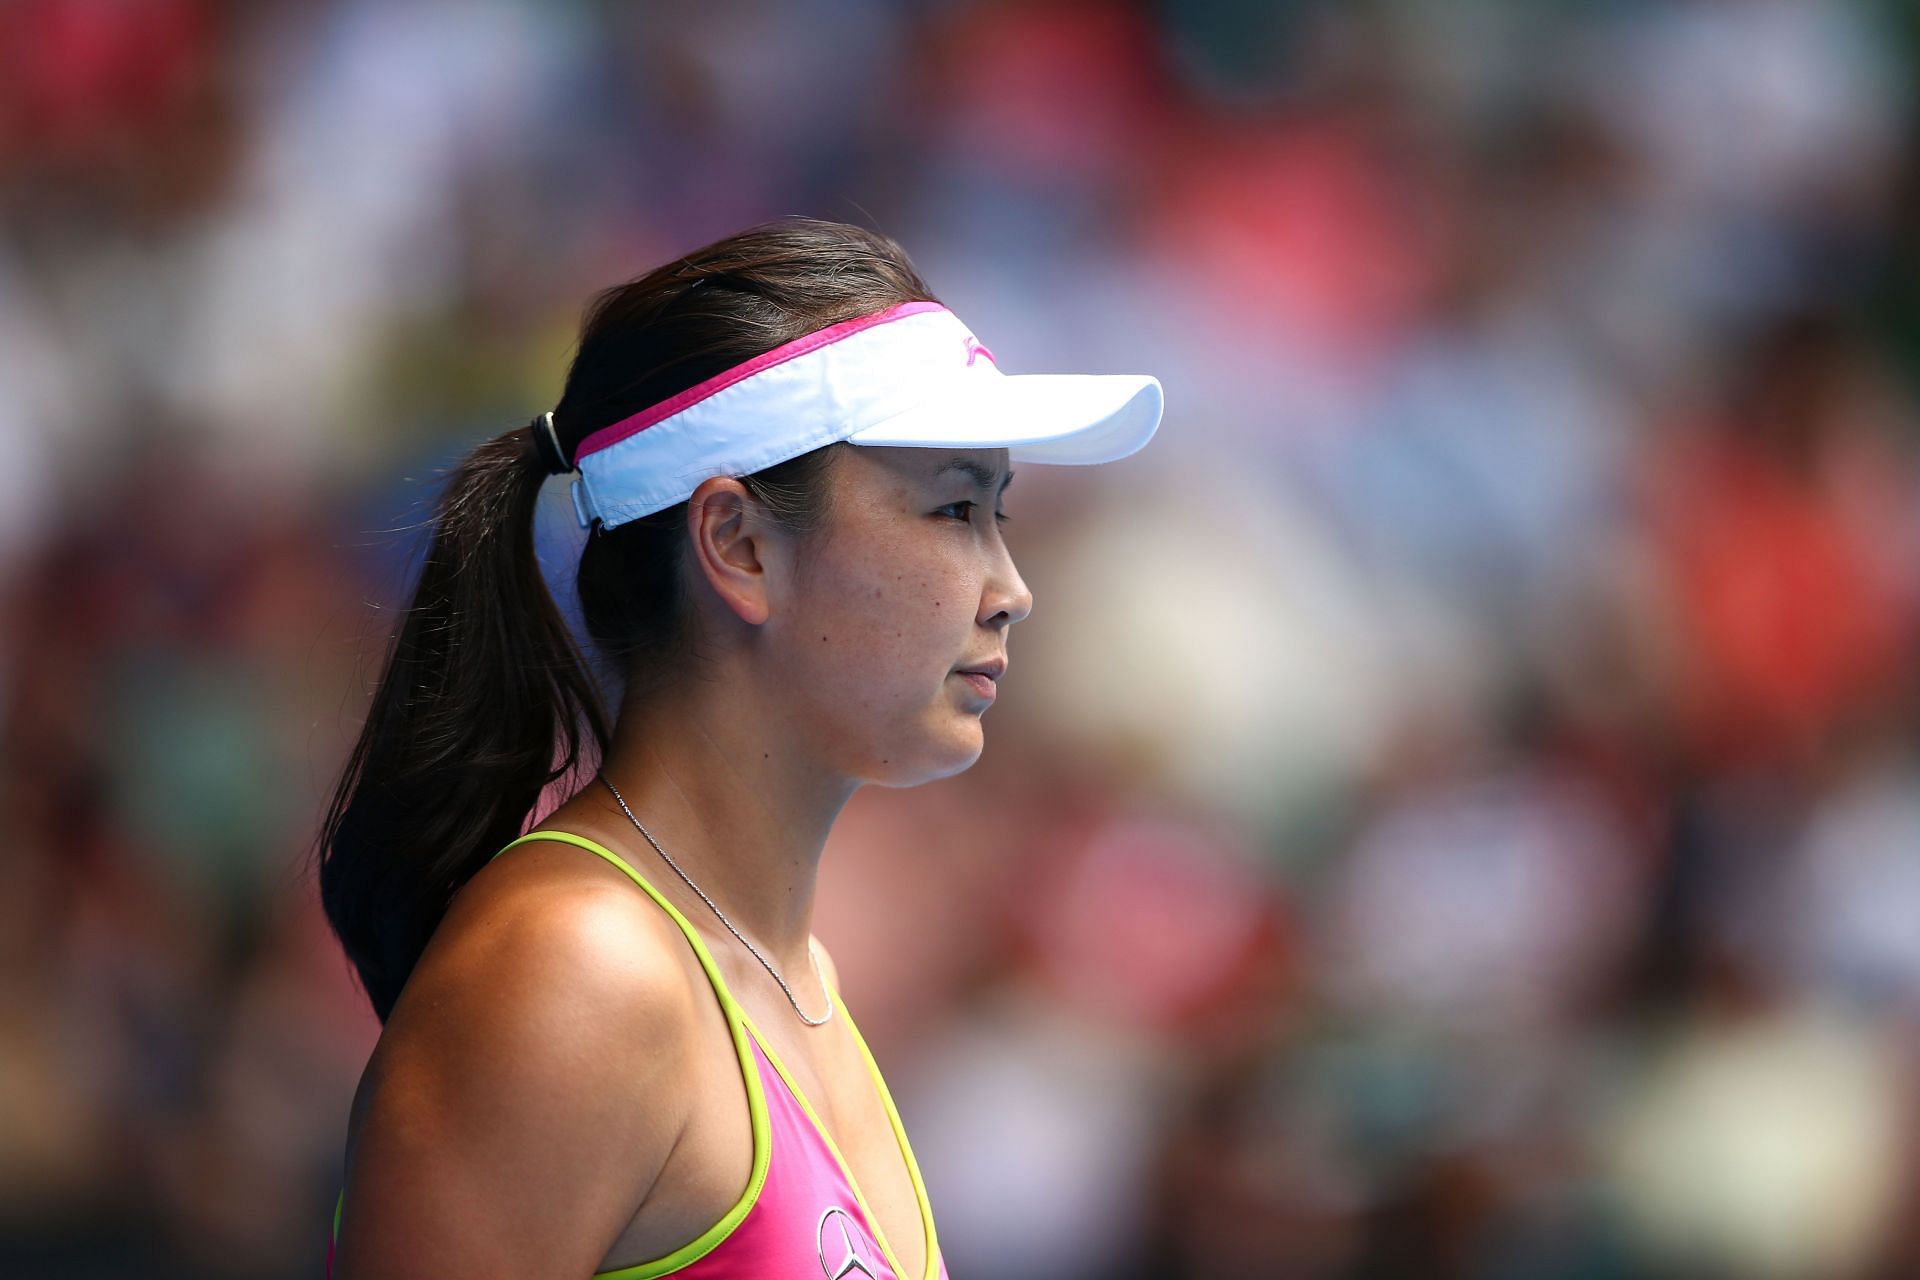 Social medai has been flooded with messages of support for Peng Shuai.